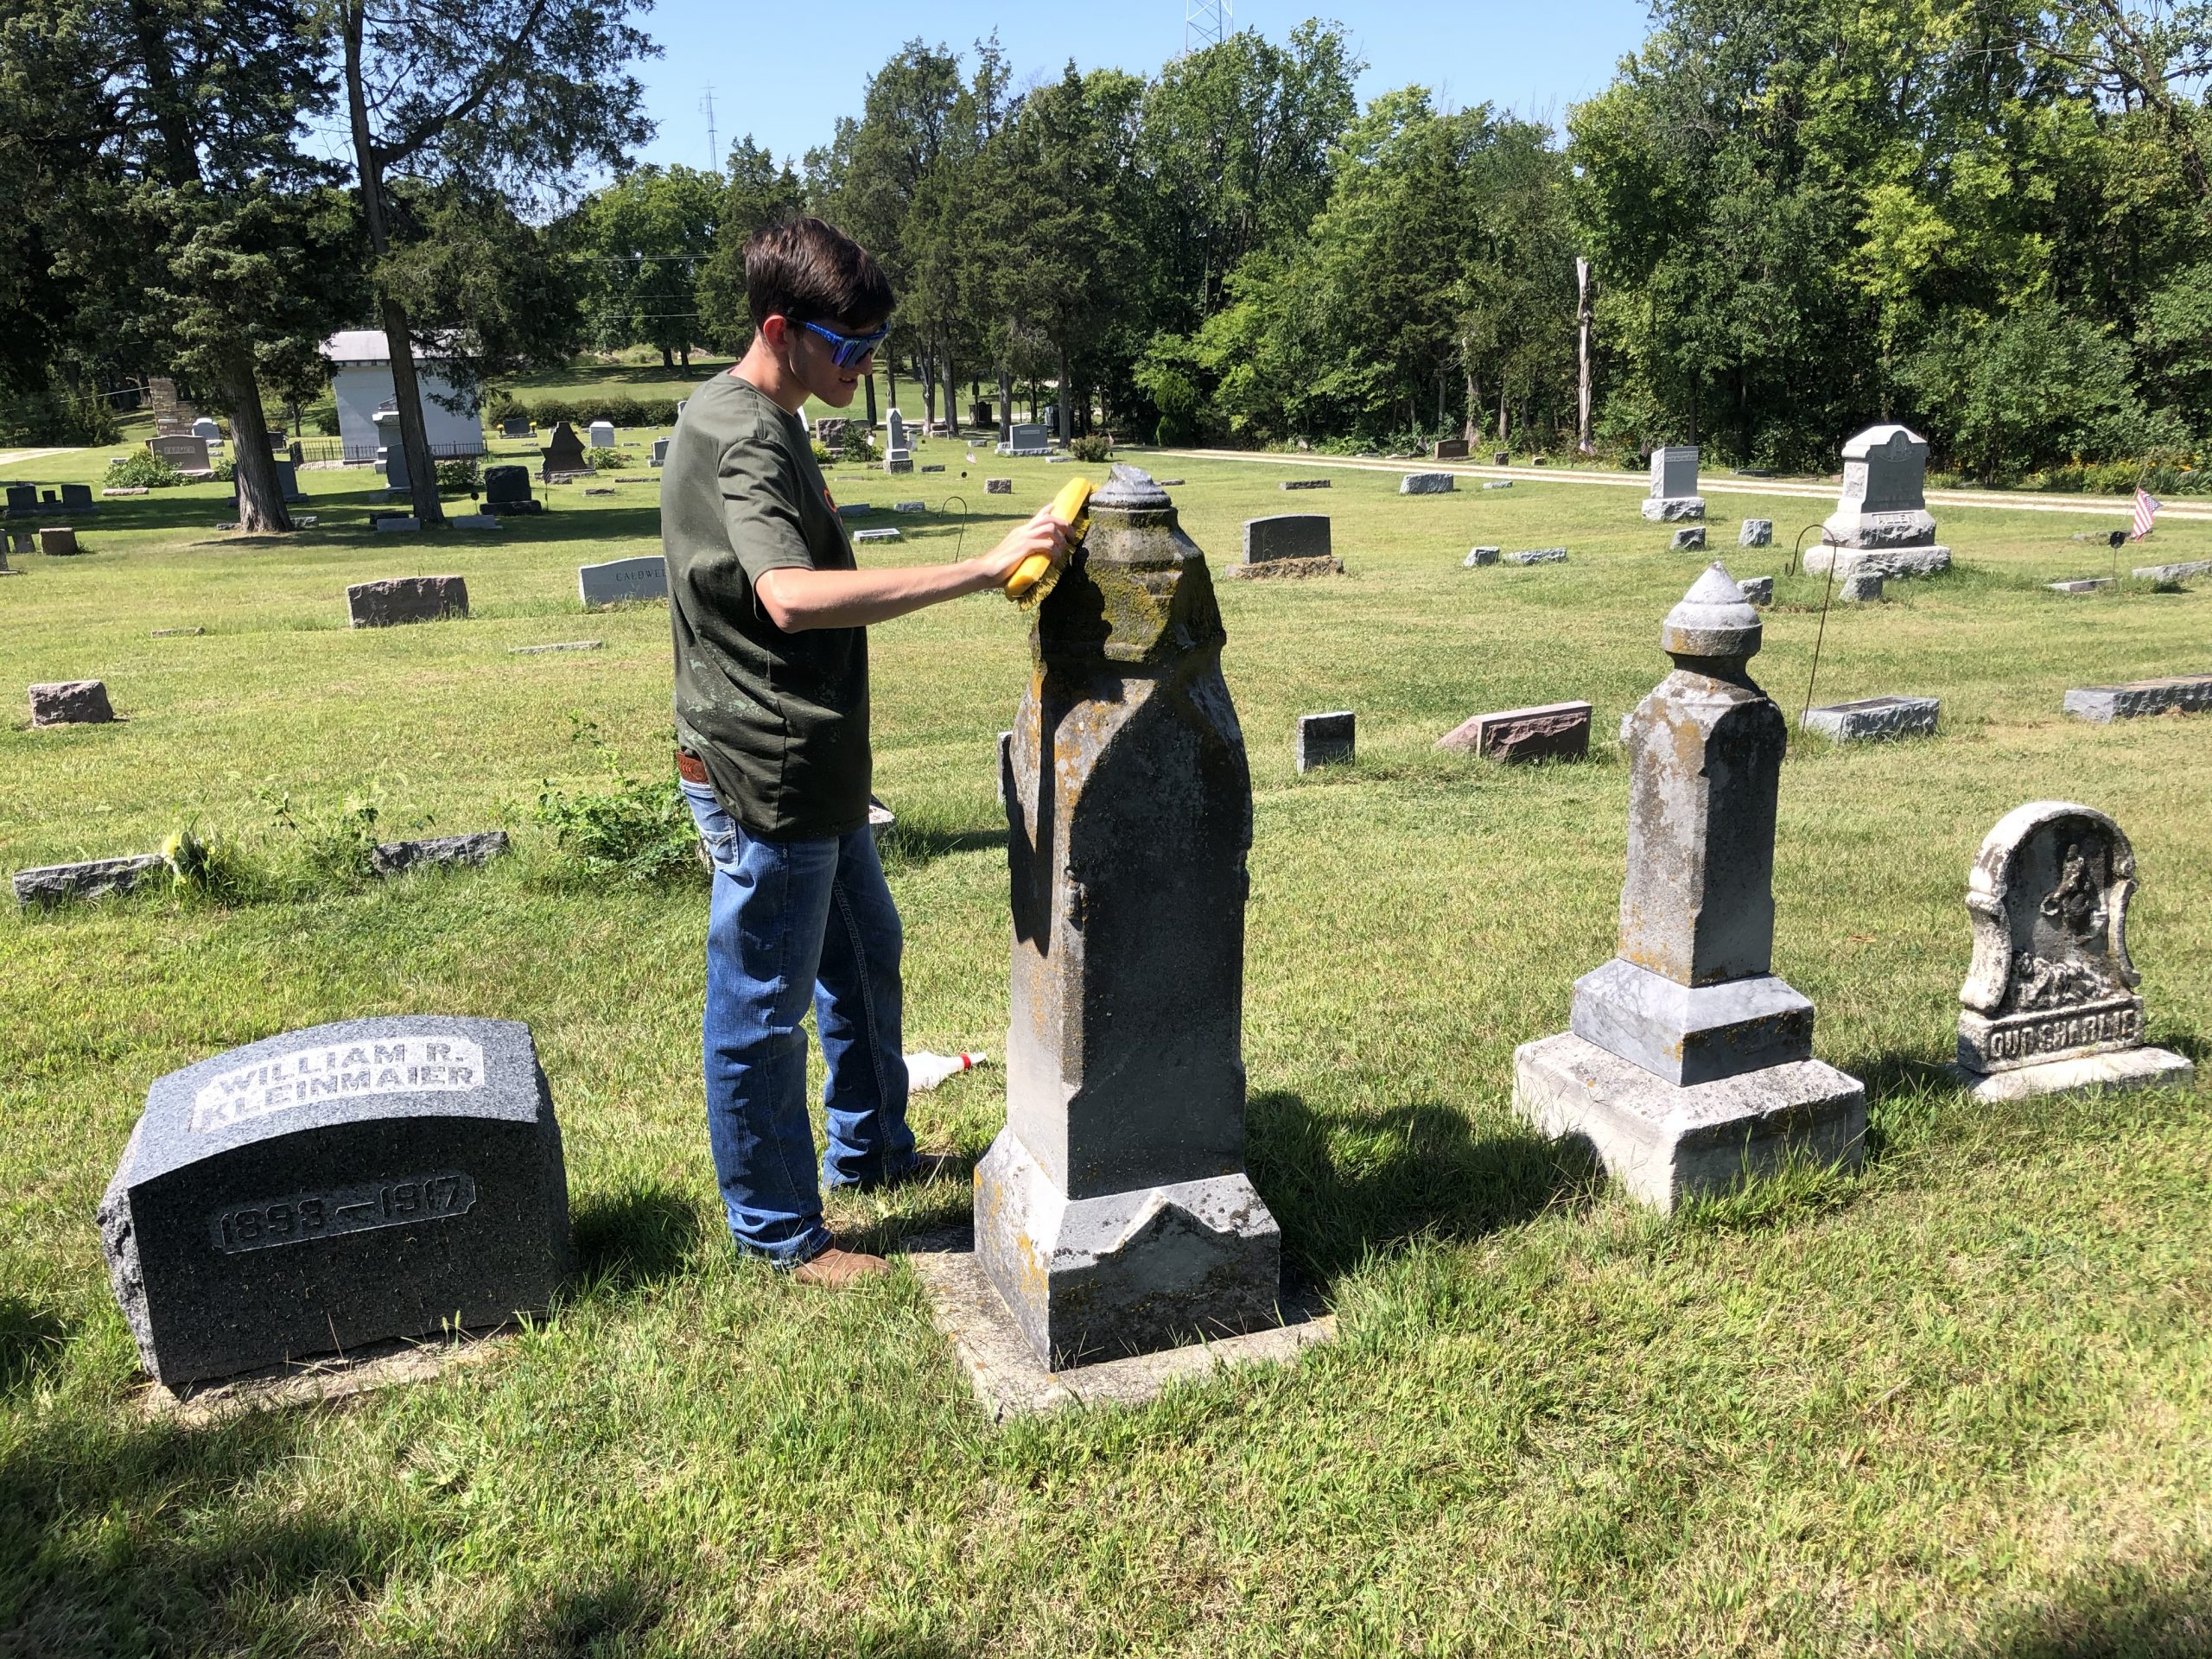  Cleaning Old Headstones – During Pandemic, Illinois Students Find a Hygienic Way to Study History 